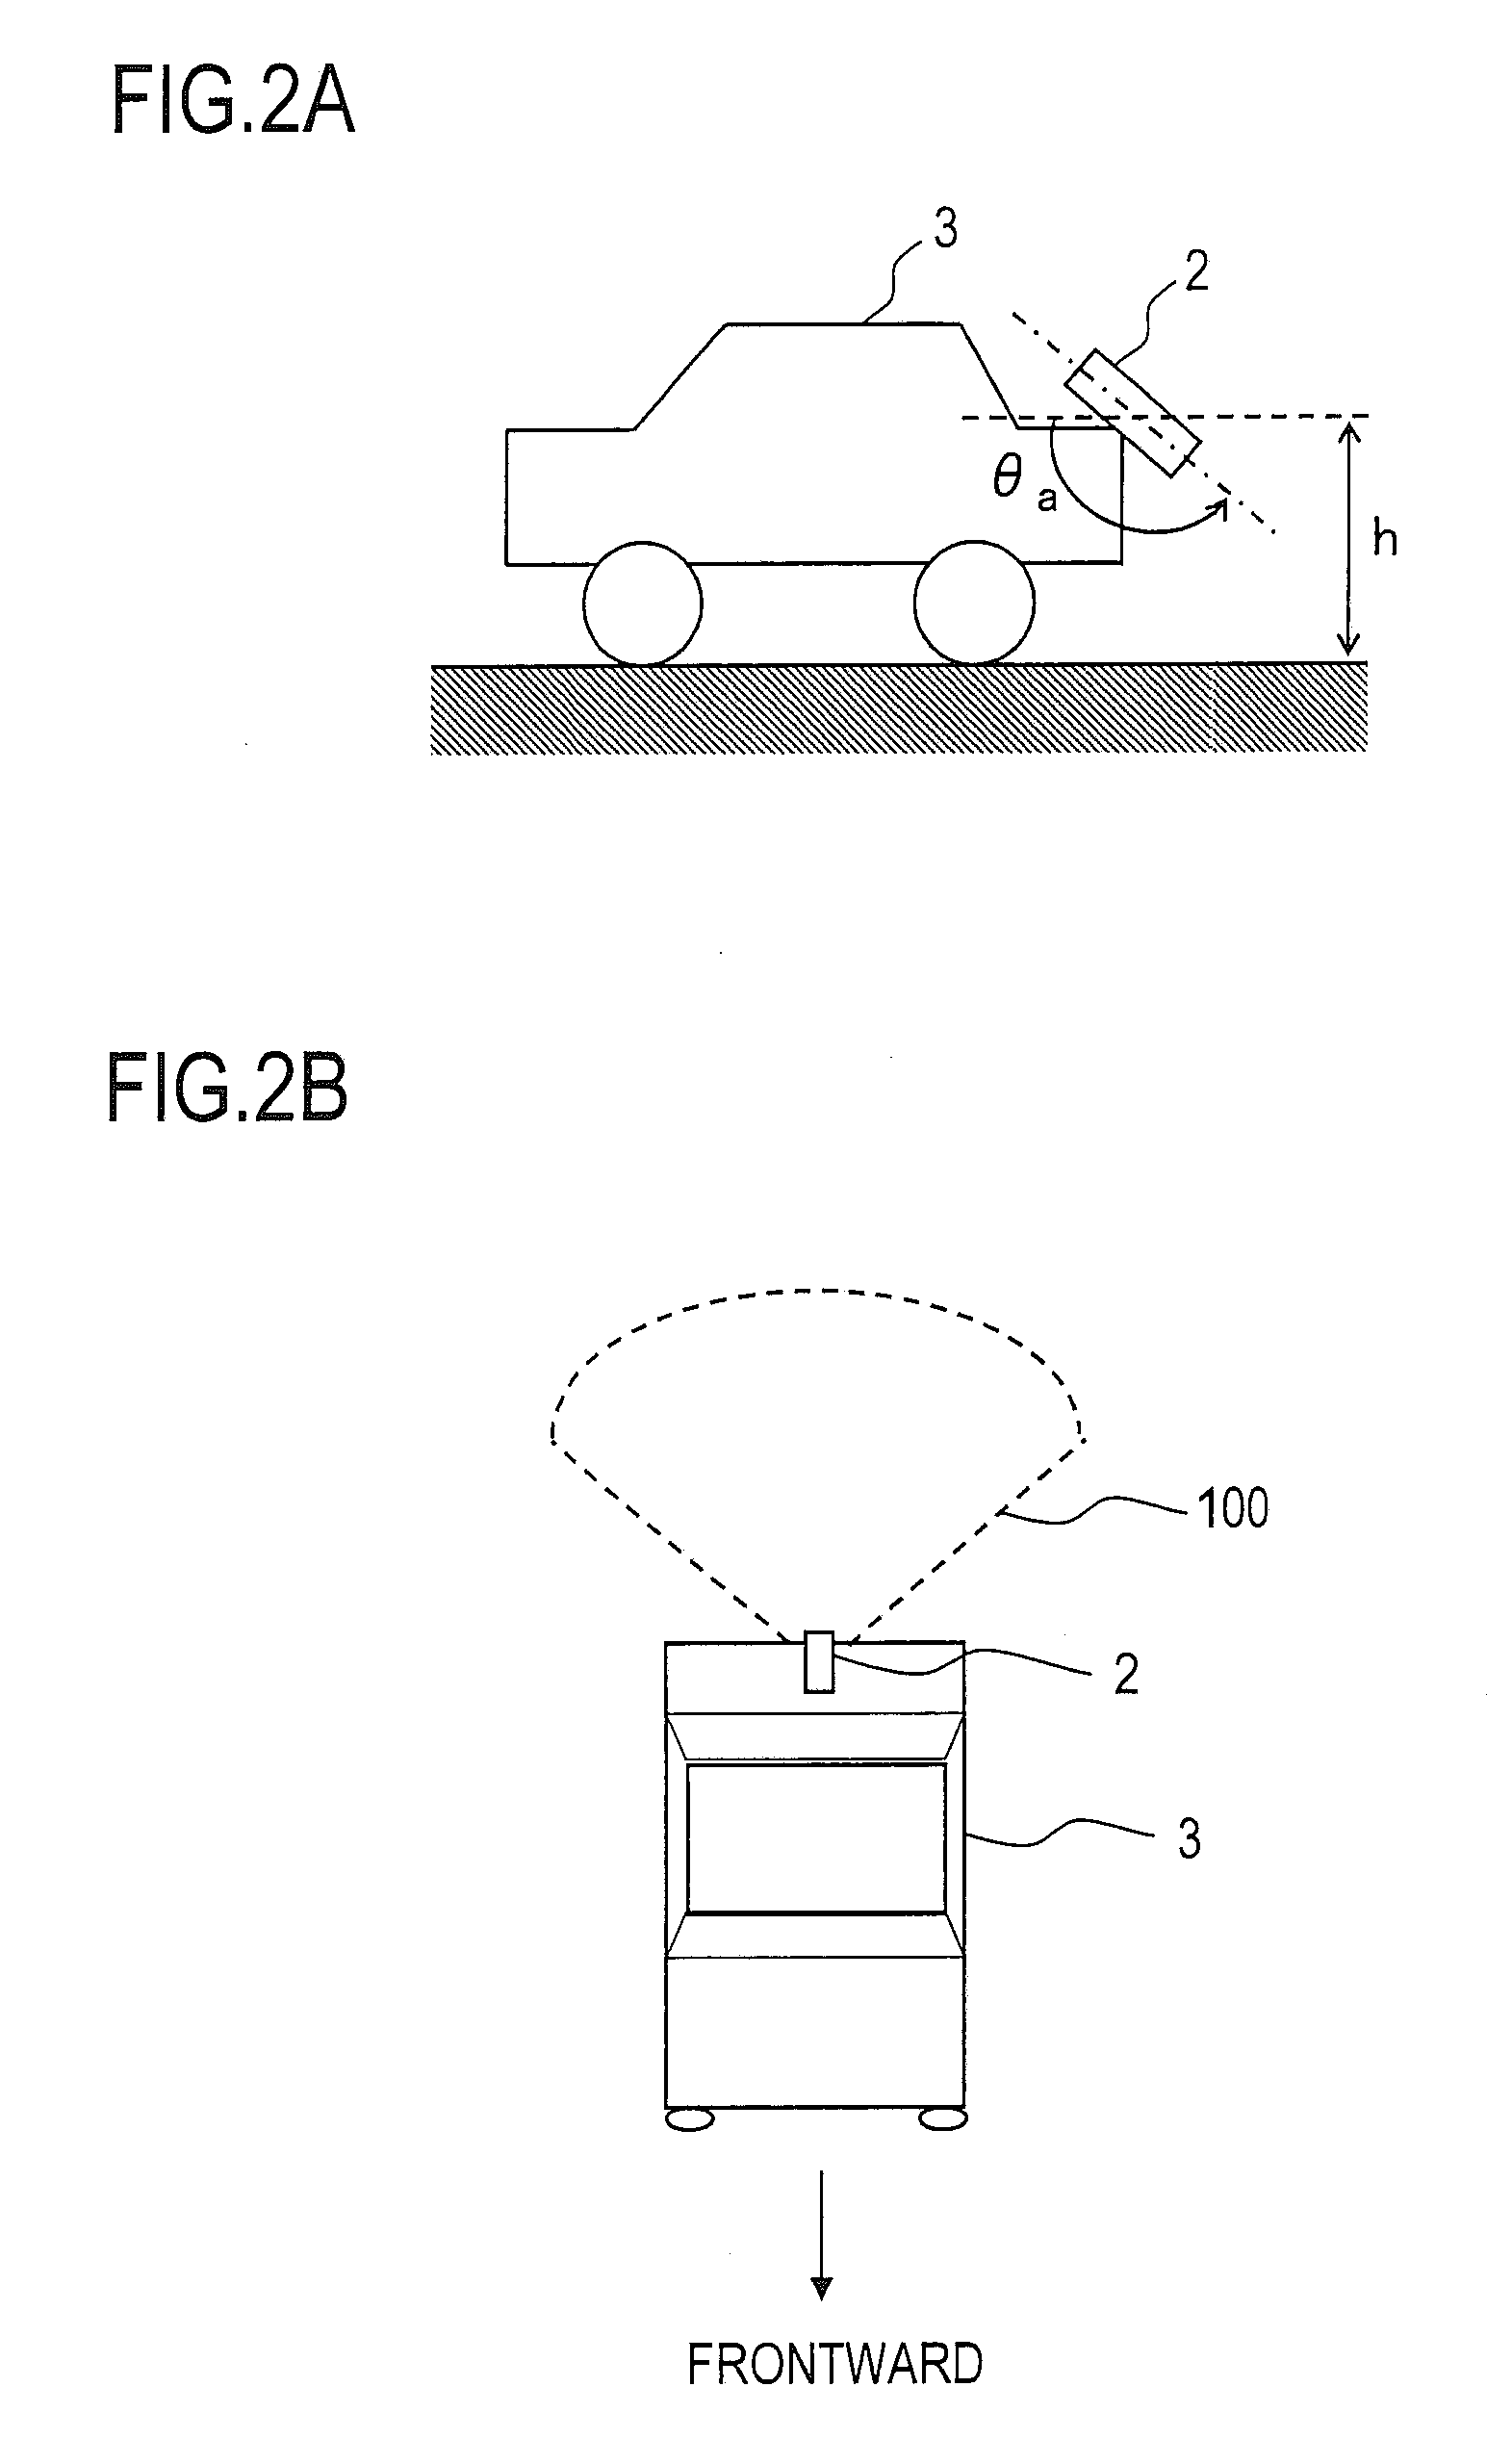 Apparatus and method for monitoring a vehicle's surroundings